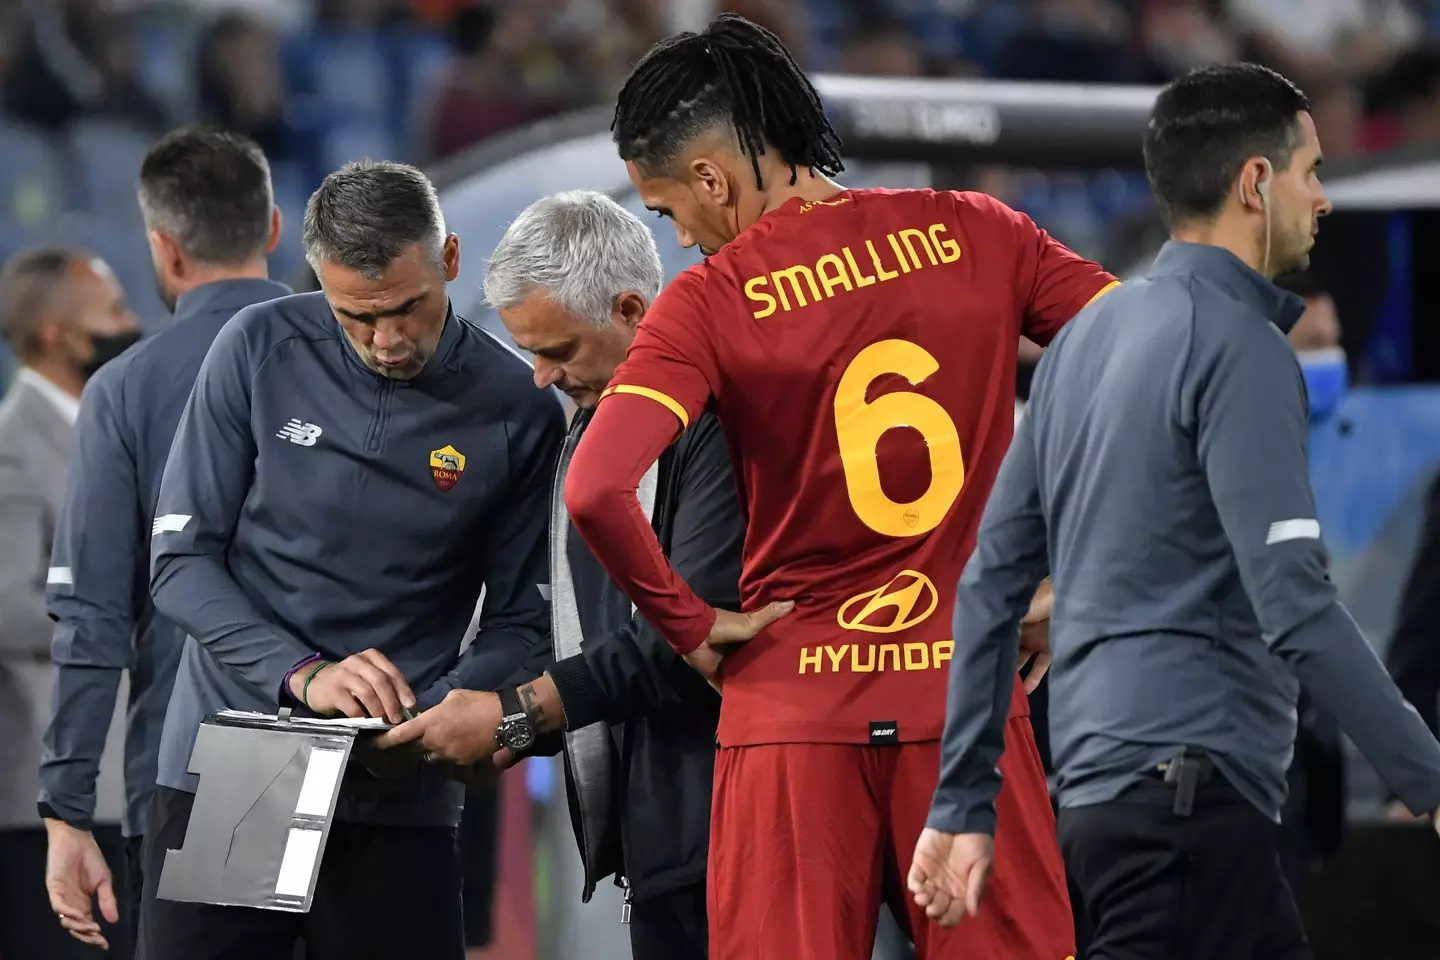 Former England defender Chris Smalling has become an integral part of Jose Mourinho’s plans at Roma.